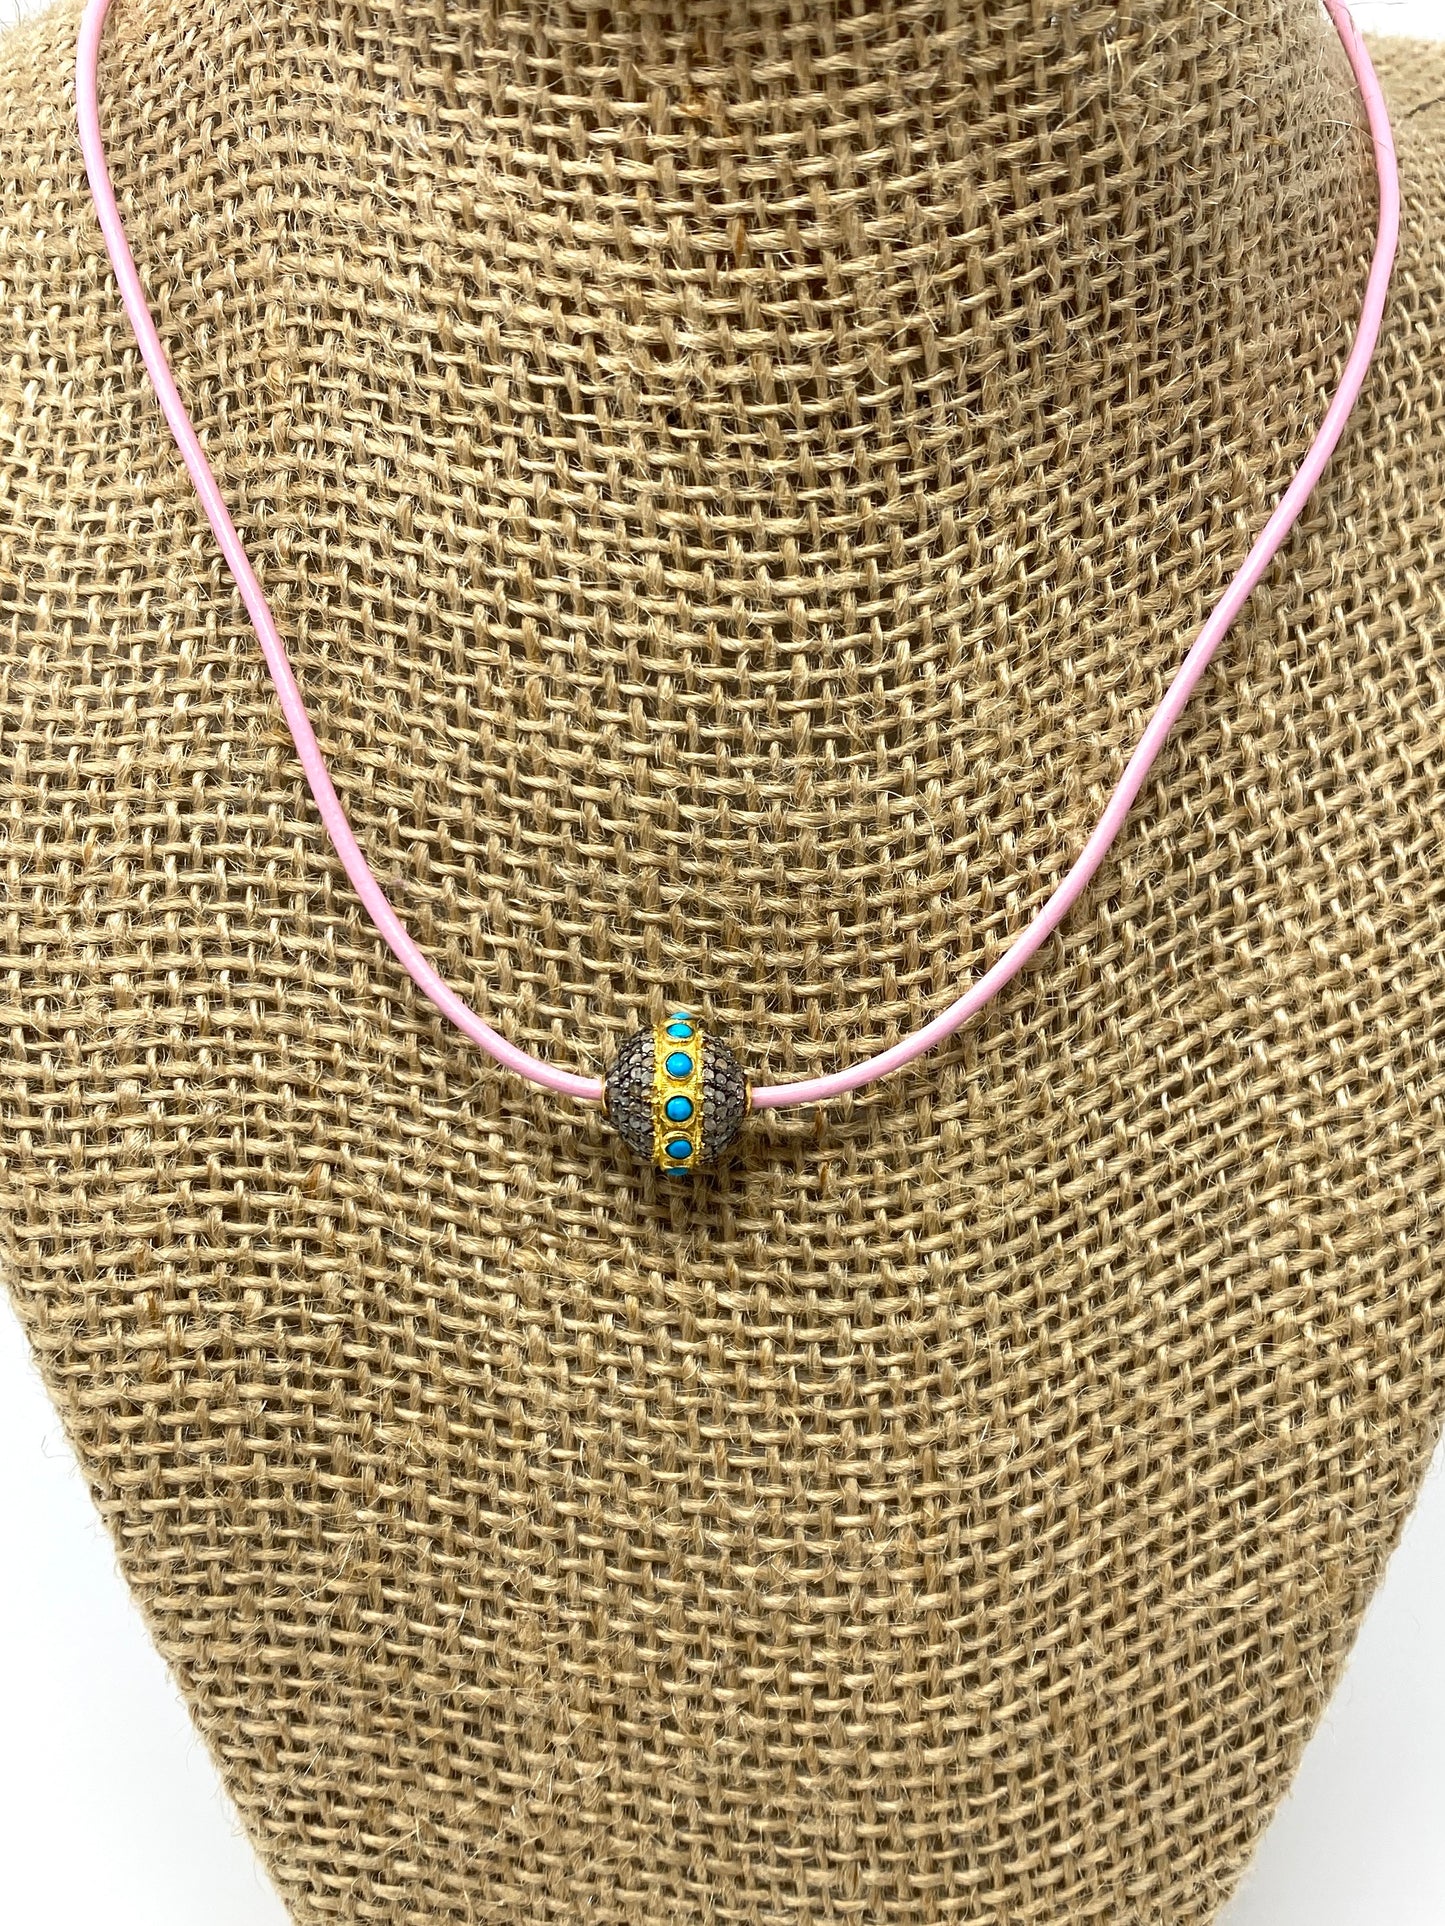 Pink Leather Choker Necklace With Diamond and Turquoise Center Bead